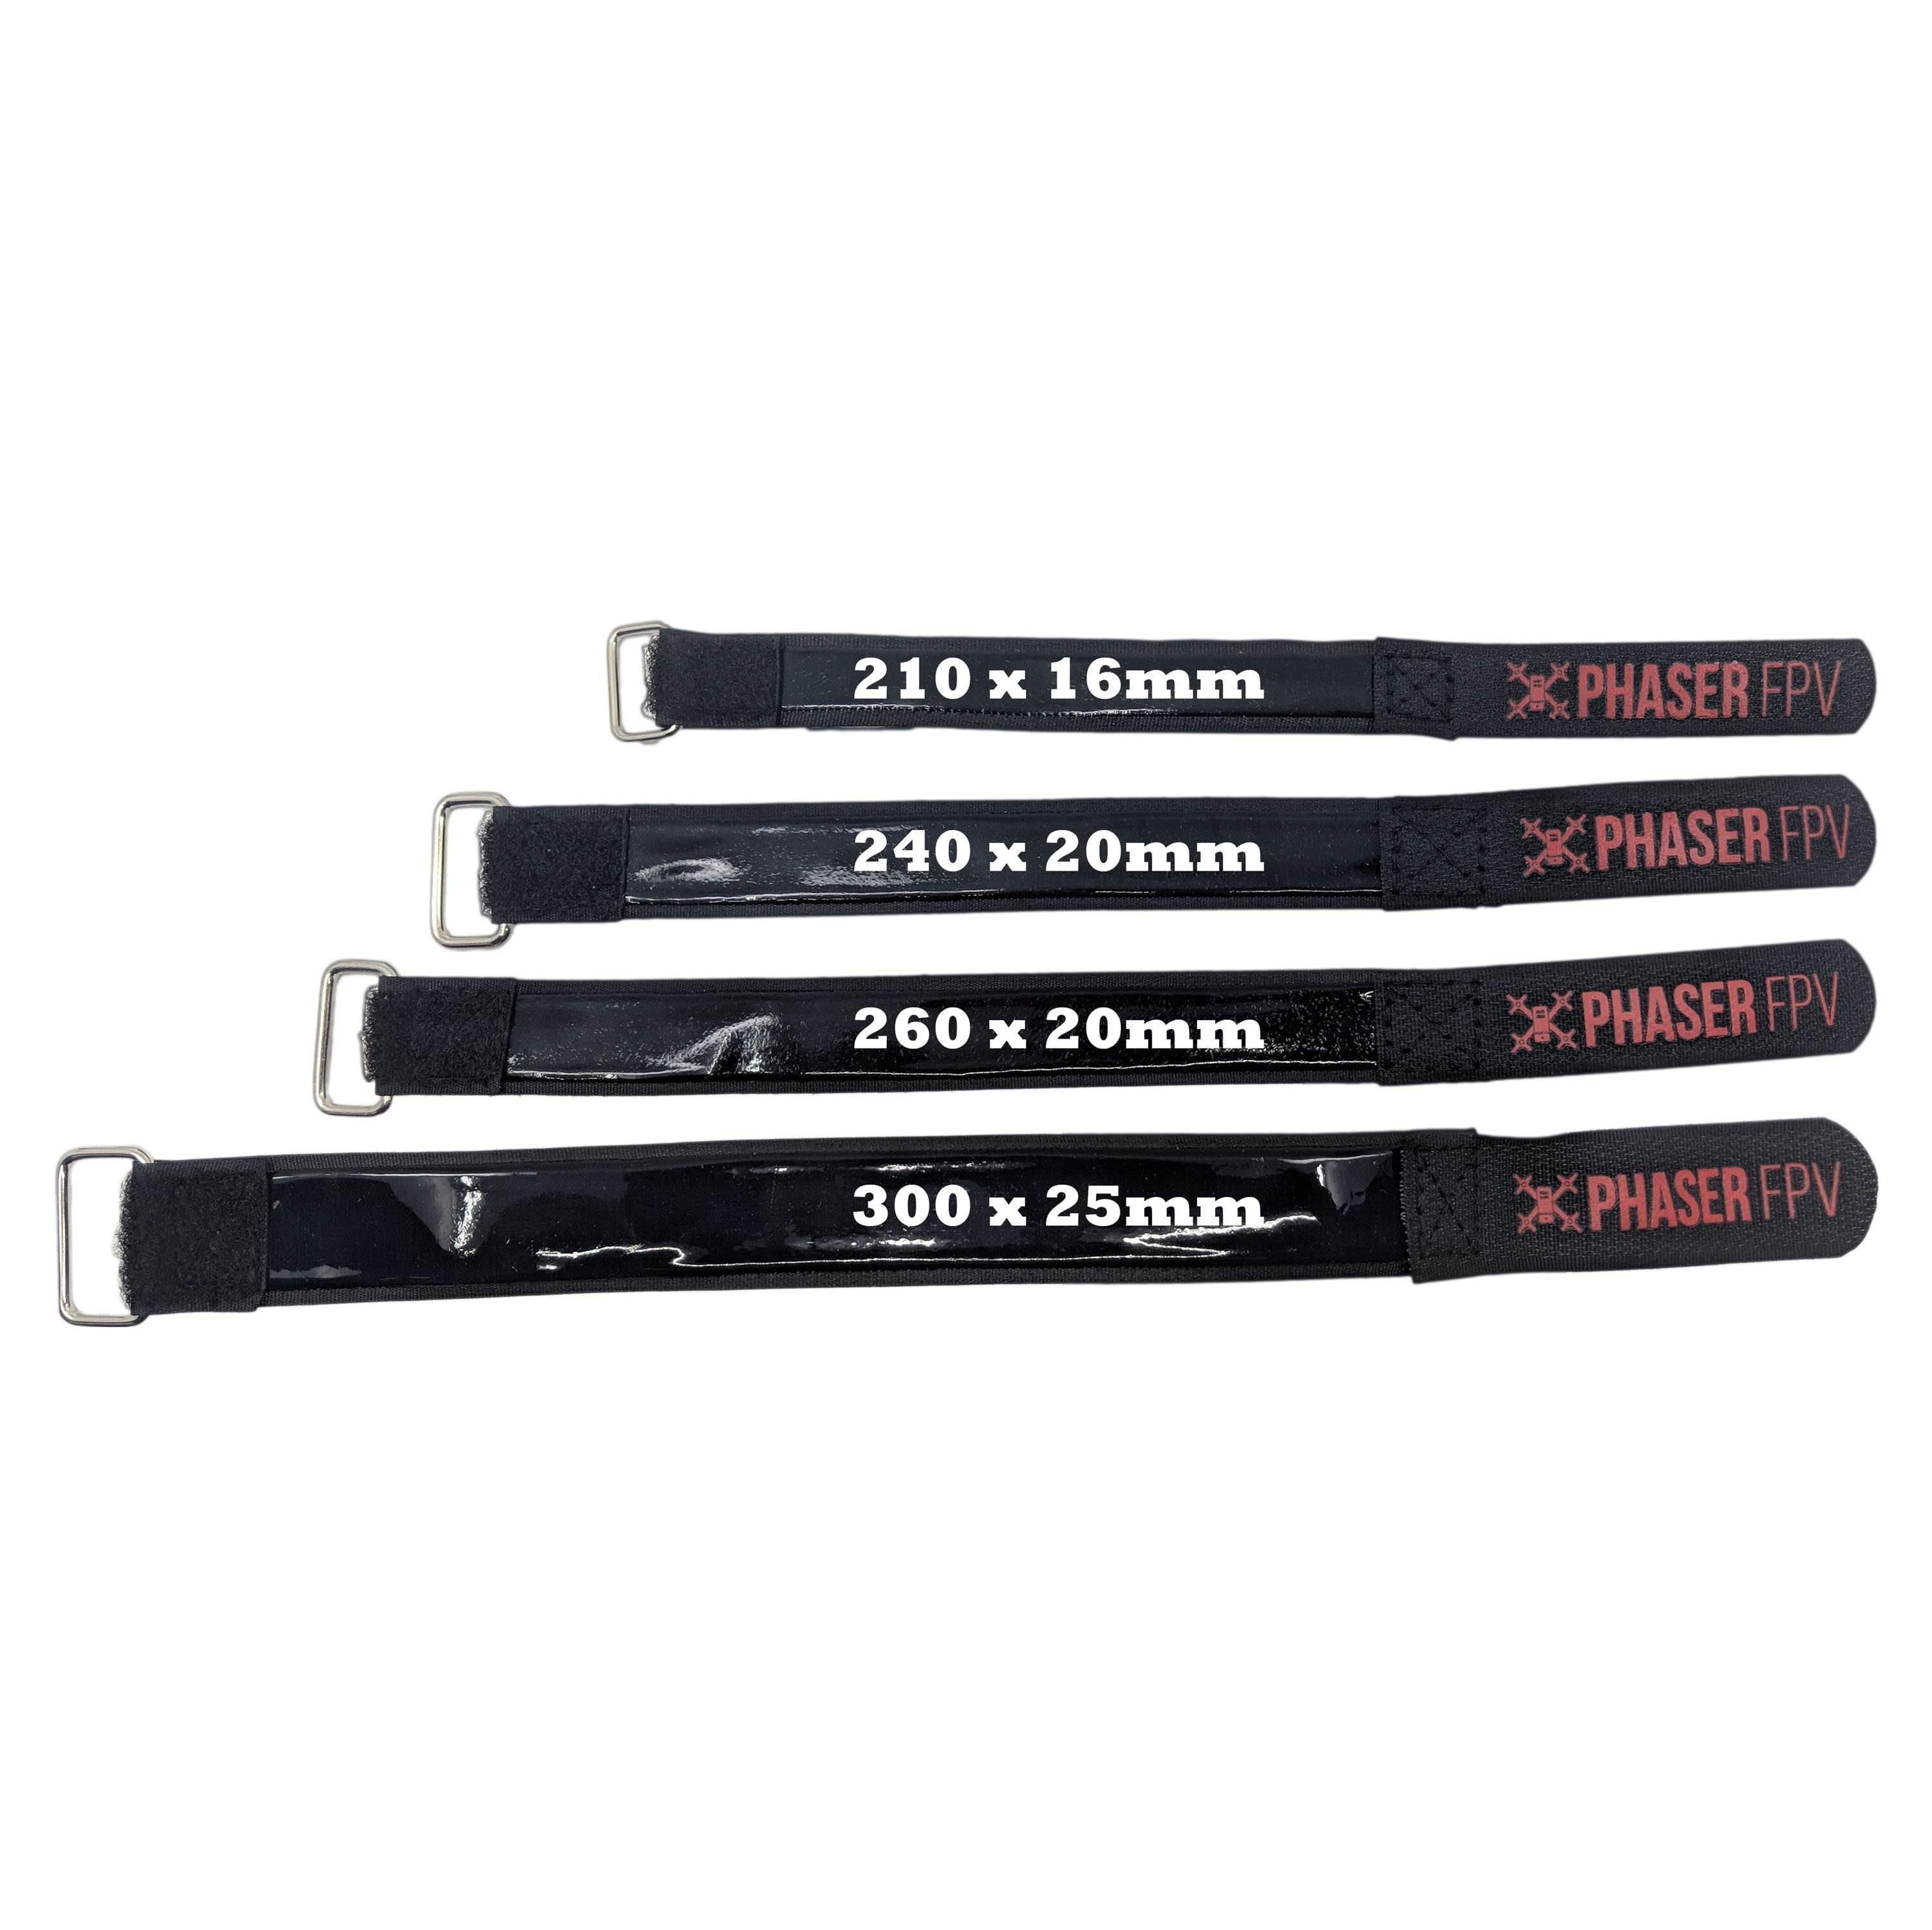 Lipo Battery Strap 260x20mm With Non-slip Coating Phaser FPV Branded